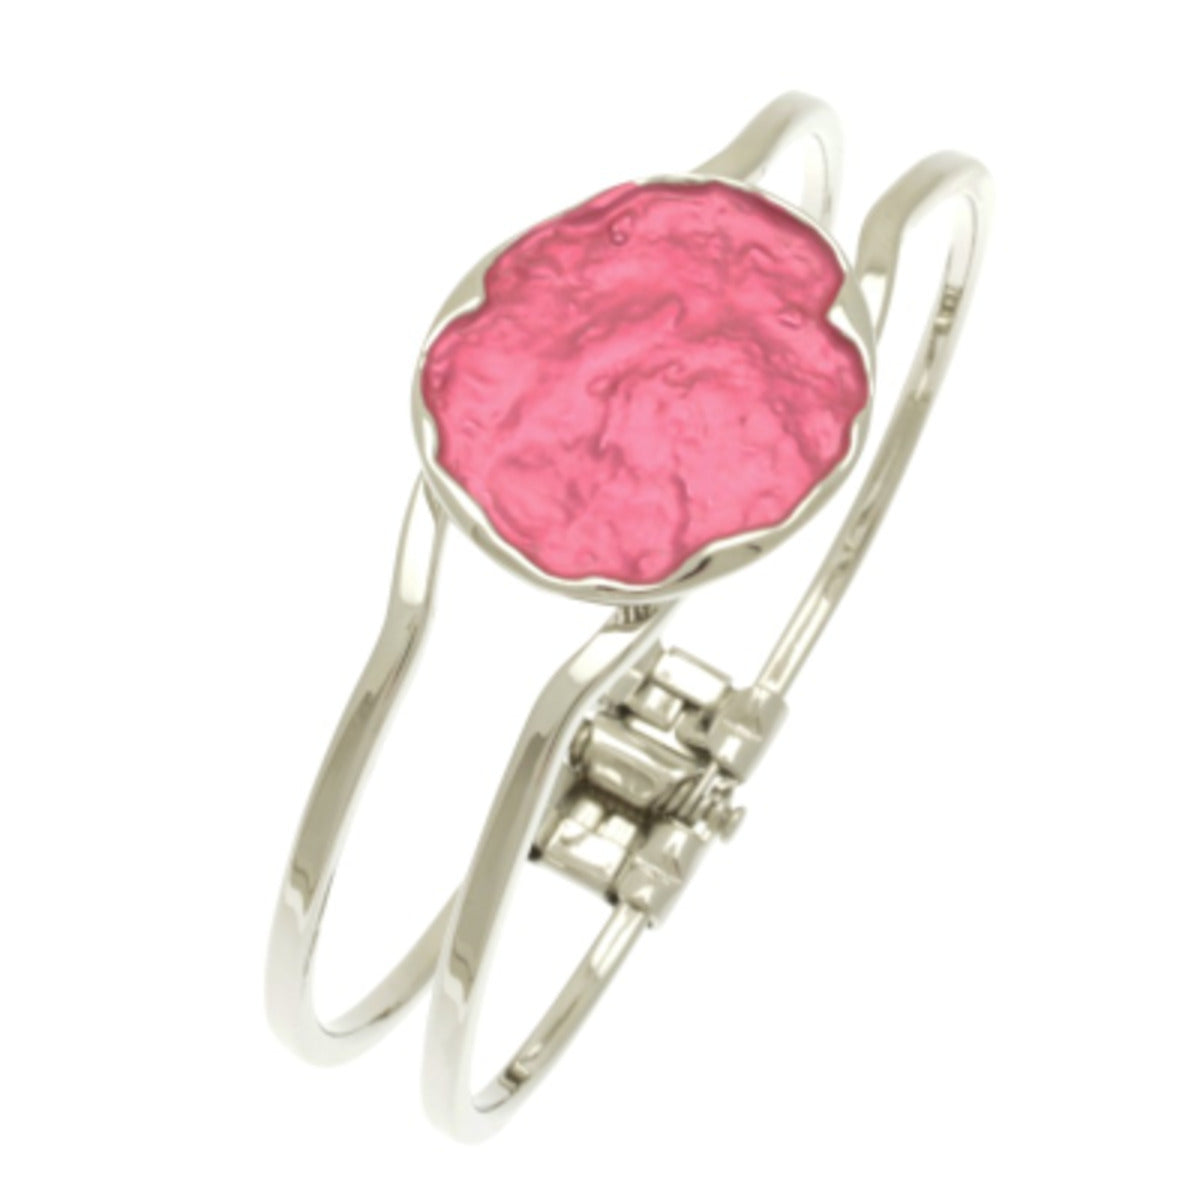 Express your style with this stunning Pink Painted One Size Hinged Bangle! The bright pink painted decoration adds a beautiful touch of color, while the hinged clasp makes it easy to slip on and off. Look fab and feel chic with this one-of-a-kind accessory!